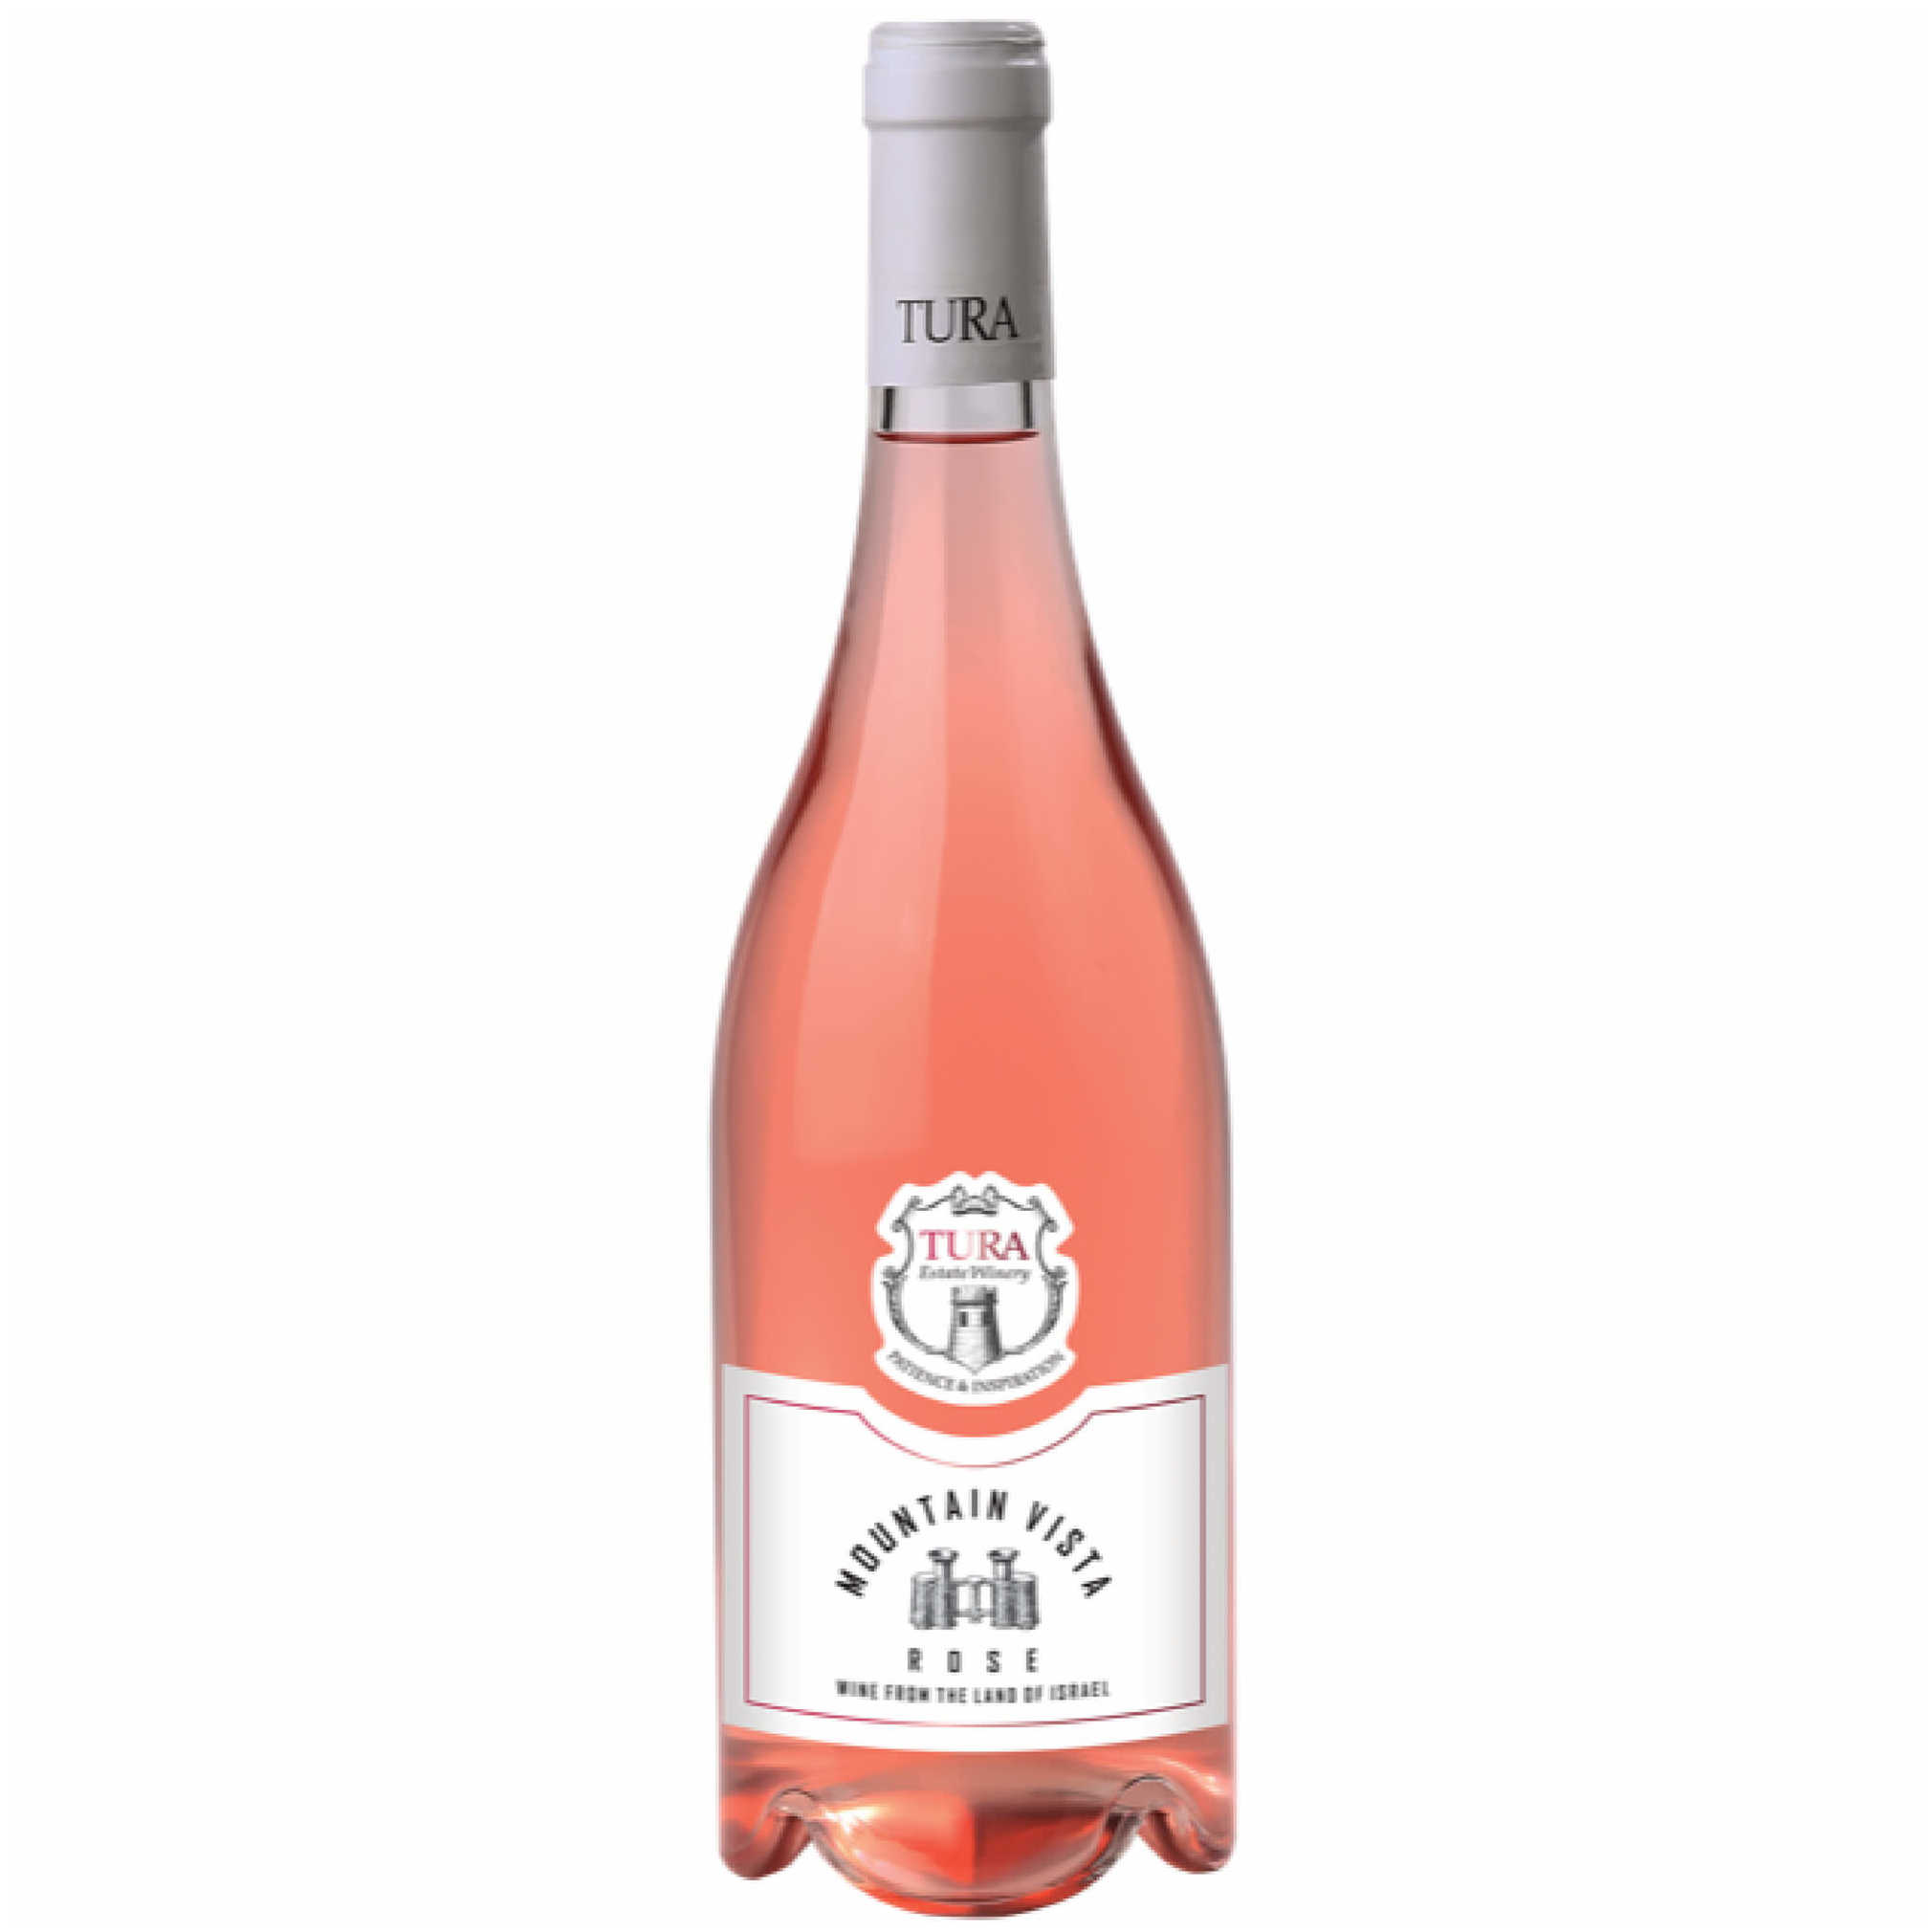 Tura Mountain Vista Rose - A Kosher Wine From Israel